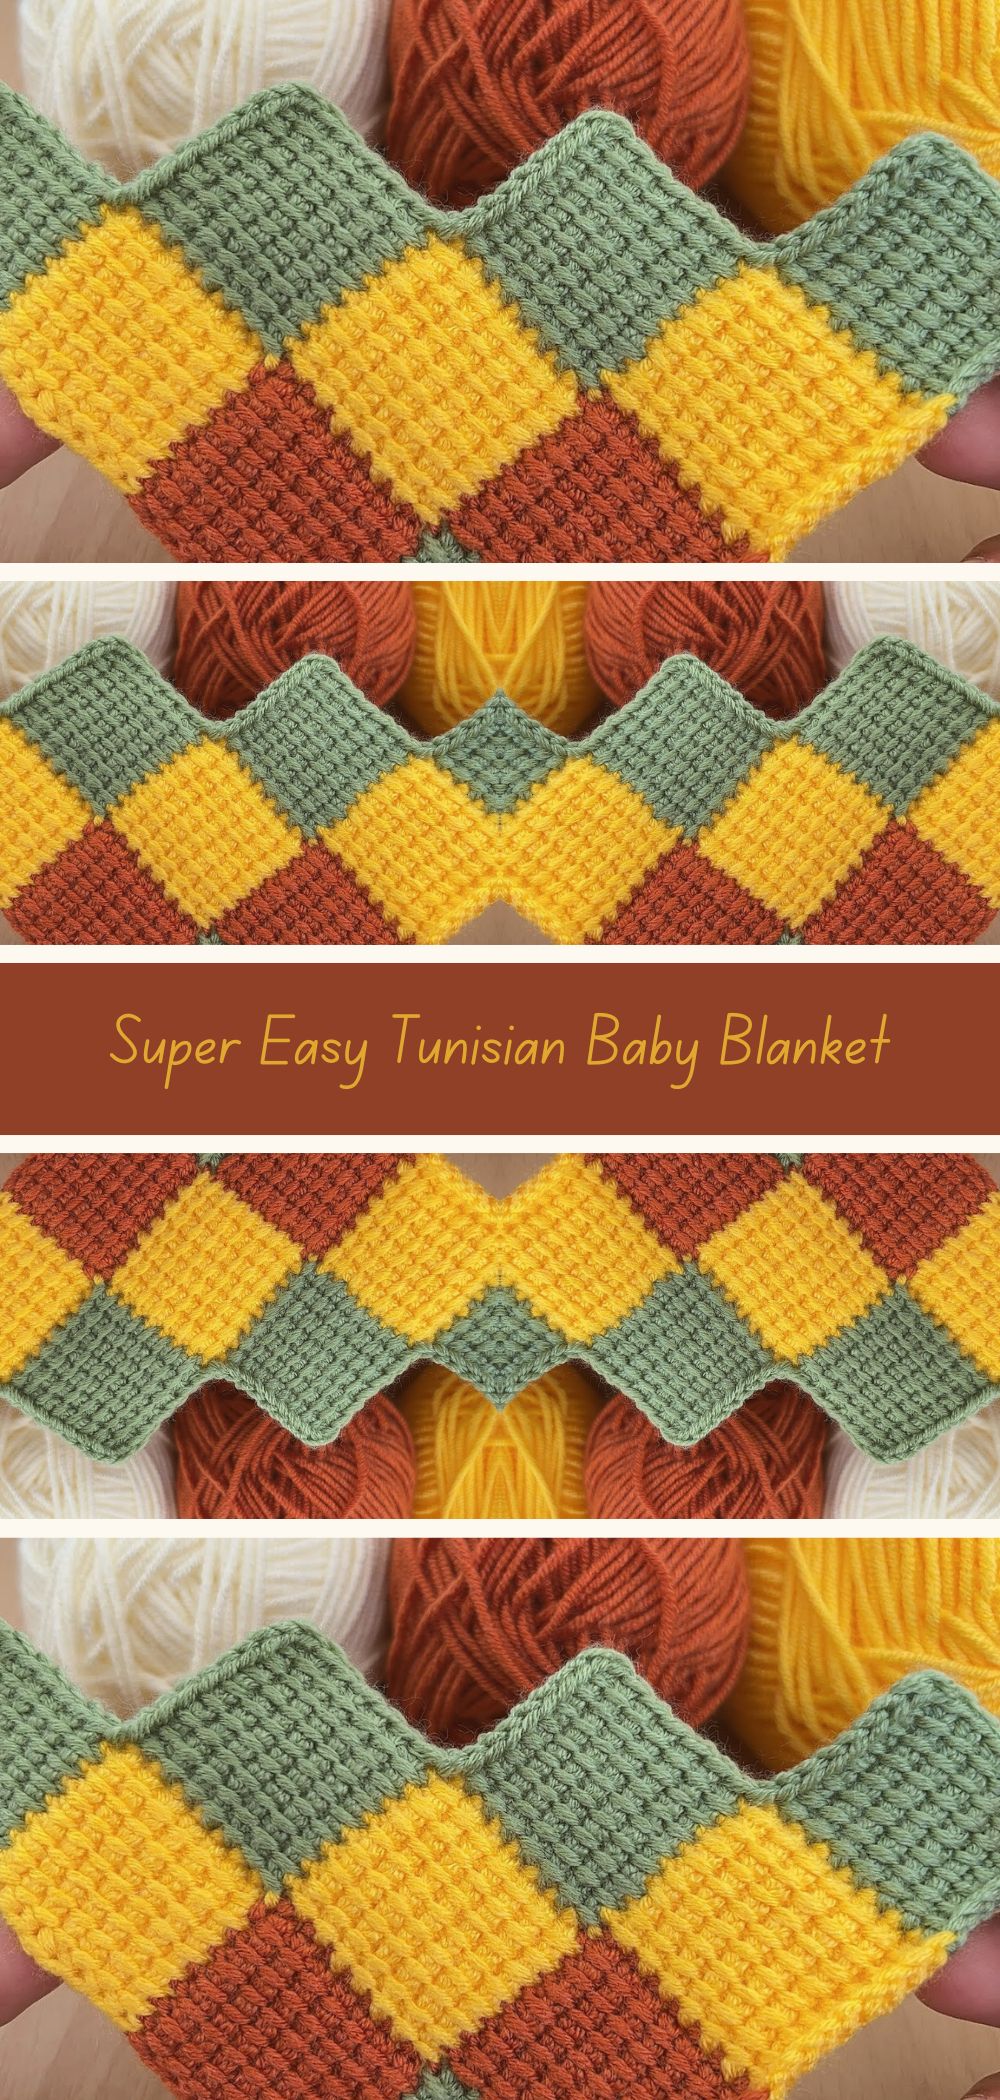 Simple Tunisian Baby Blanket Pattern - Create a soft and cozy blanket for your little one with this beginner-friendly Tunisian crochet pattern